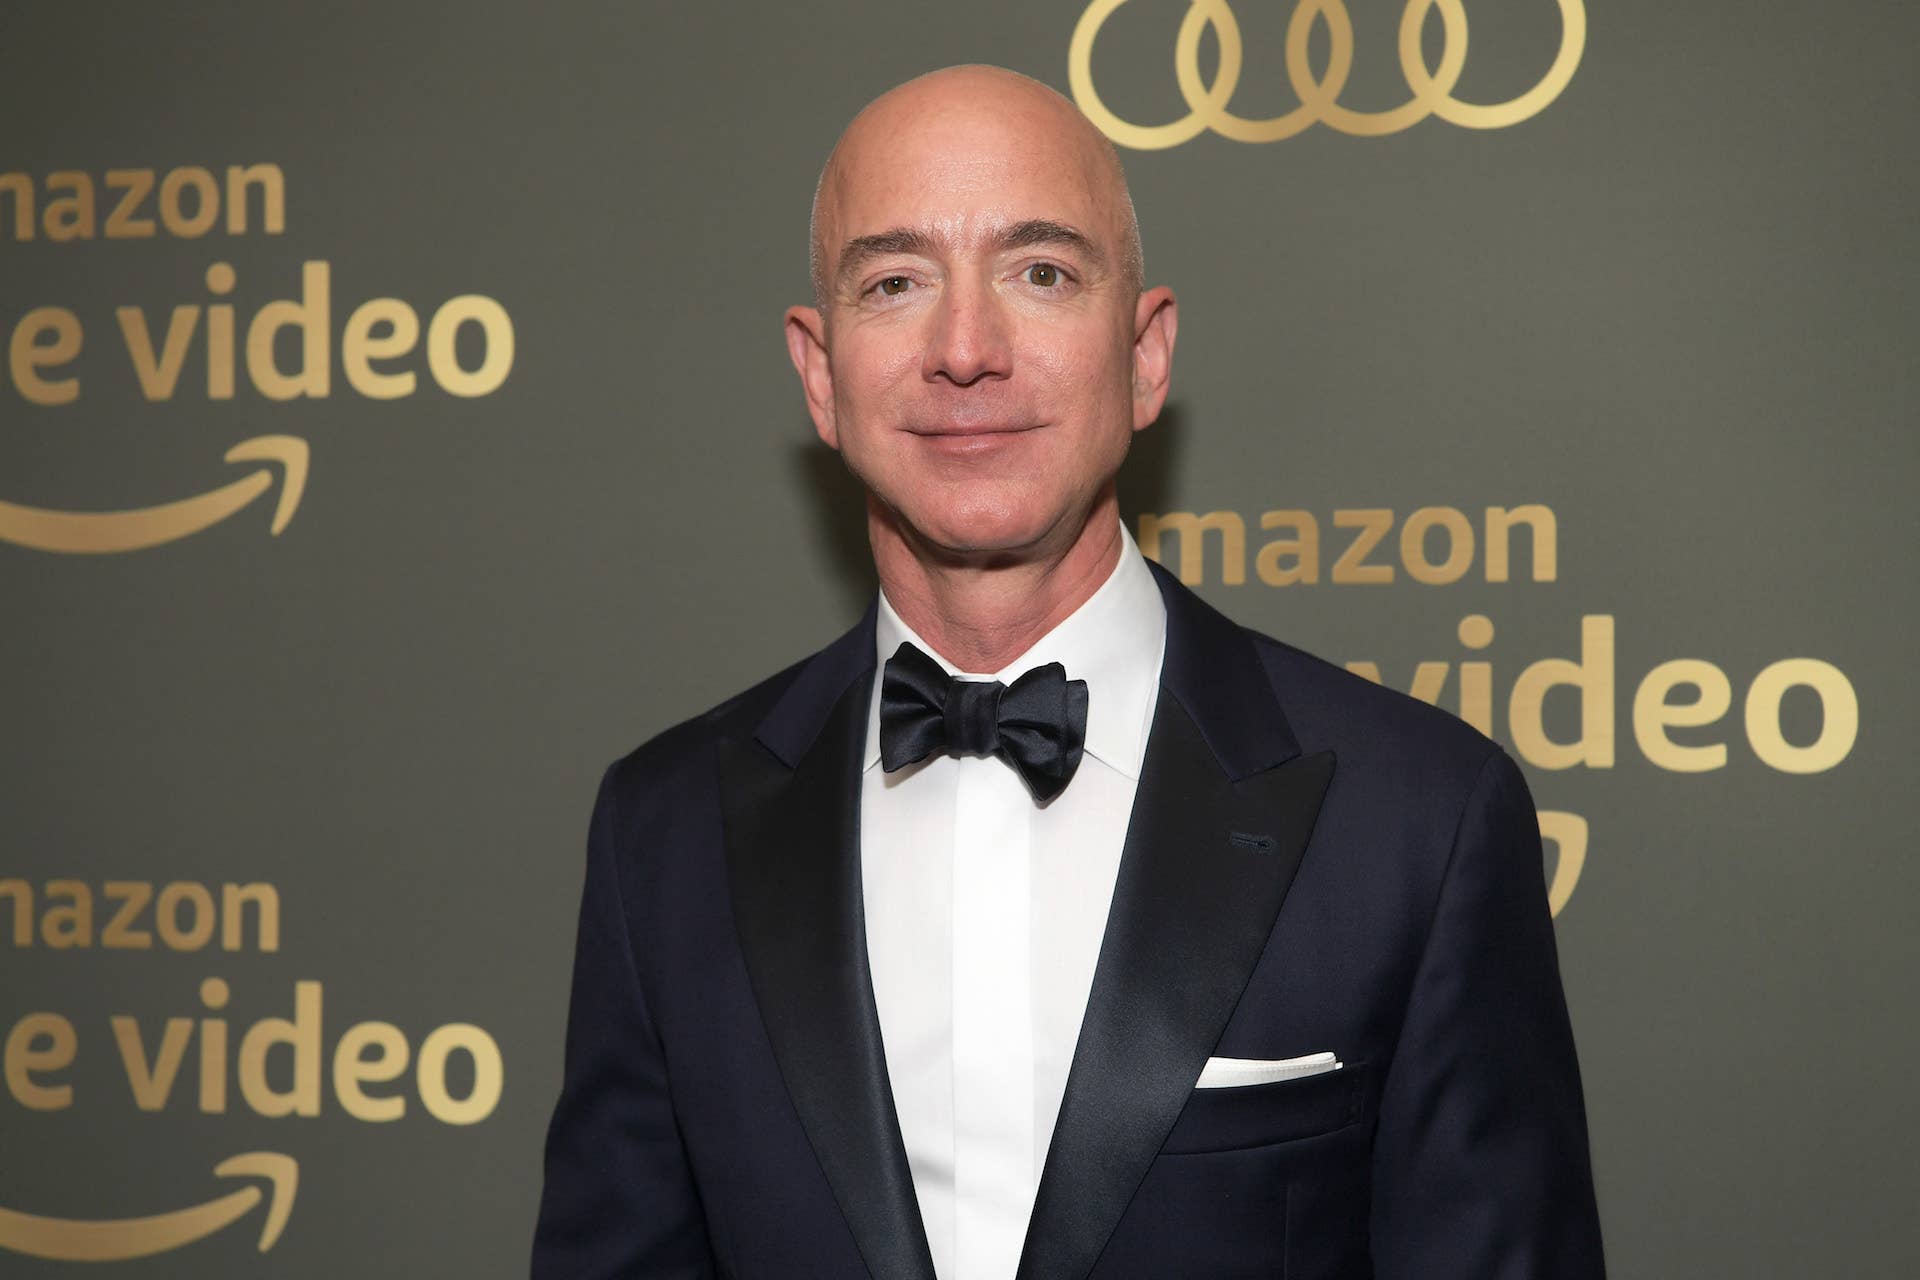 Jeff Bezos attends the Amazon Prime Video's Golden Globe Awards After Party.